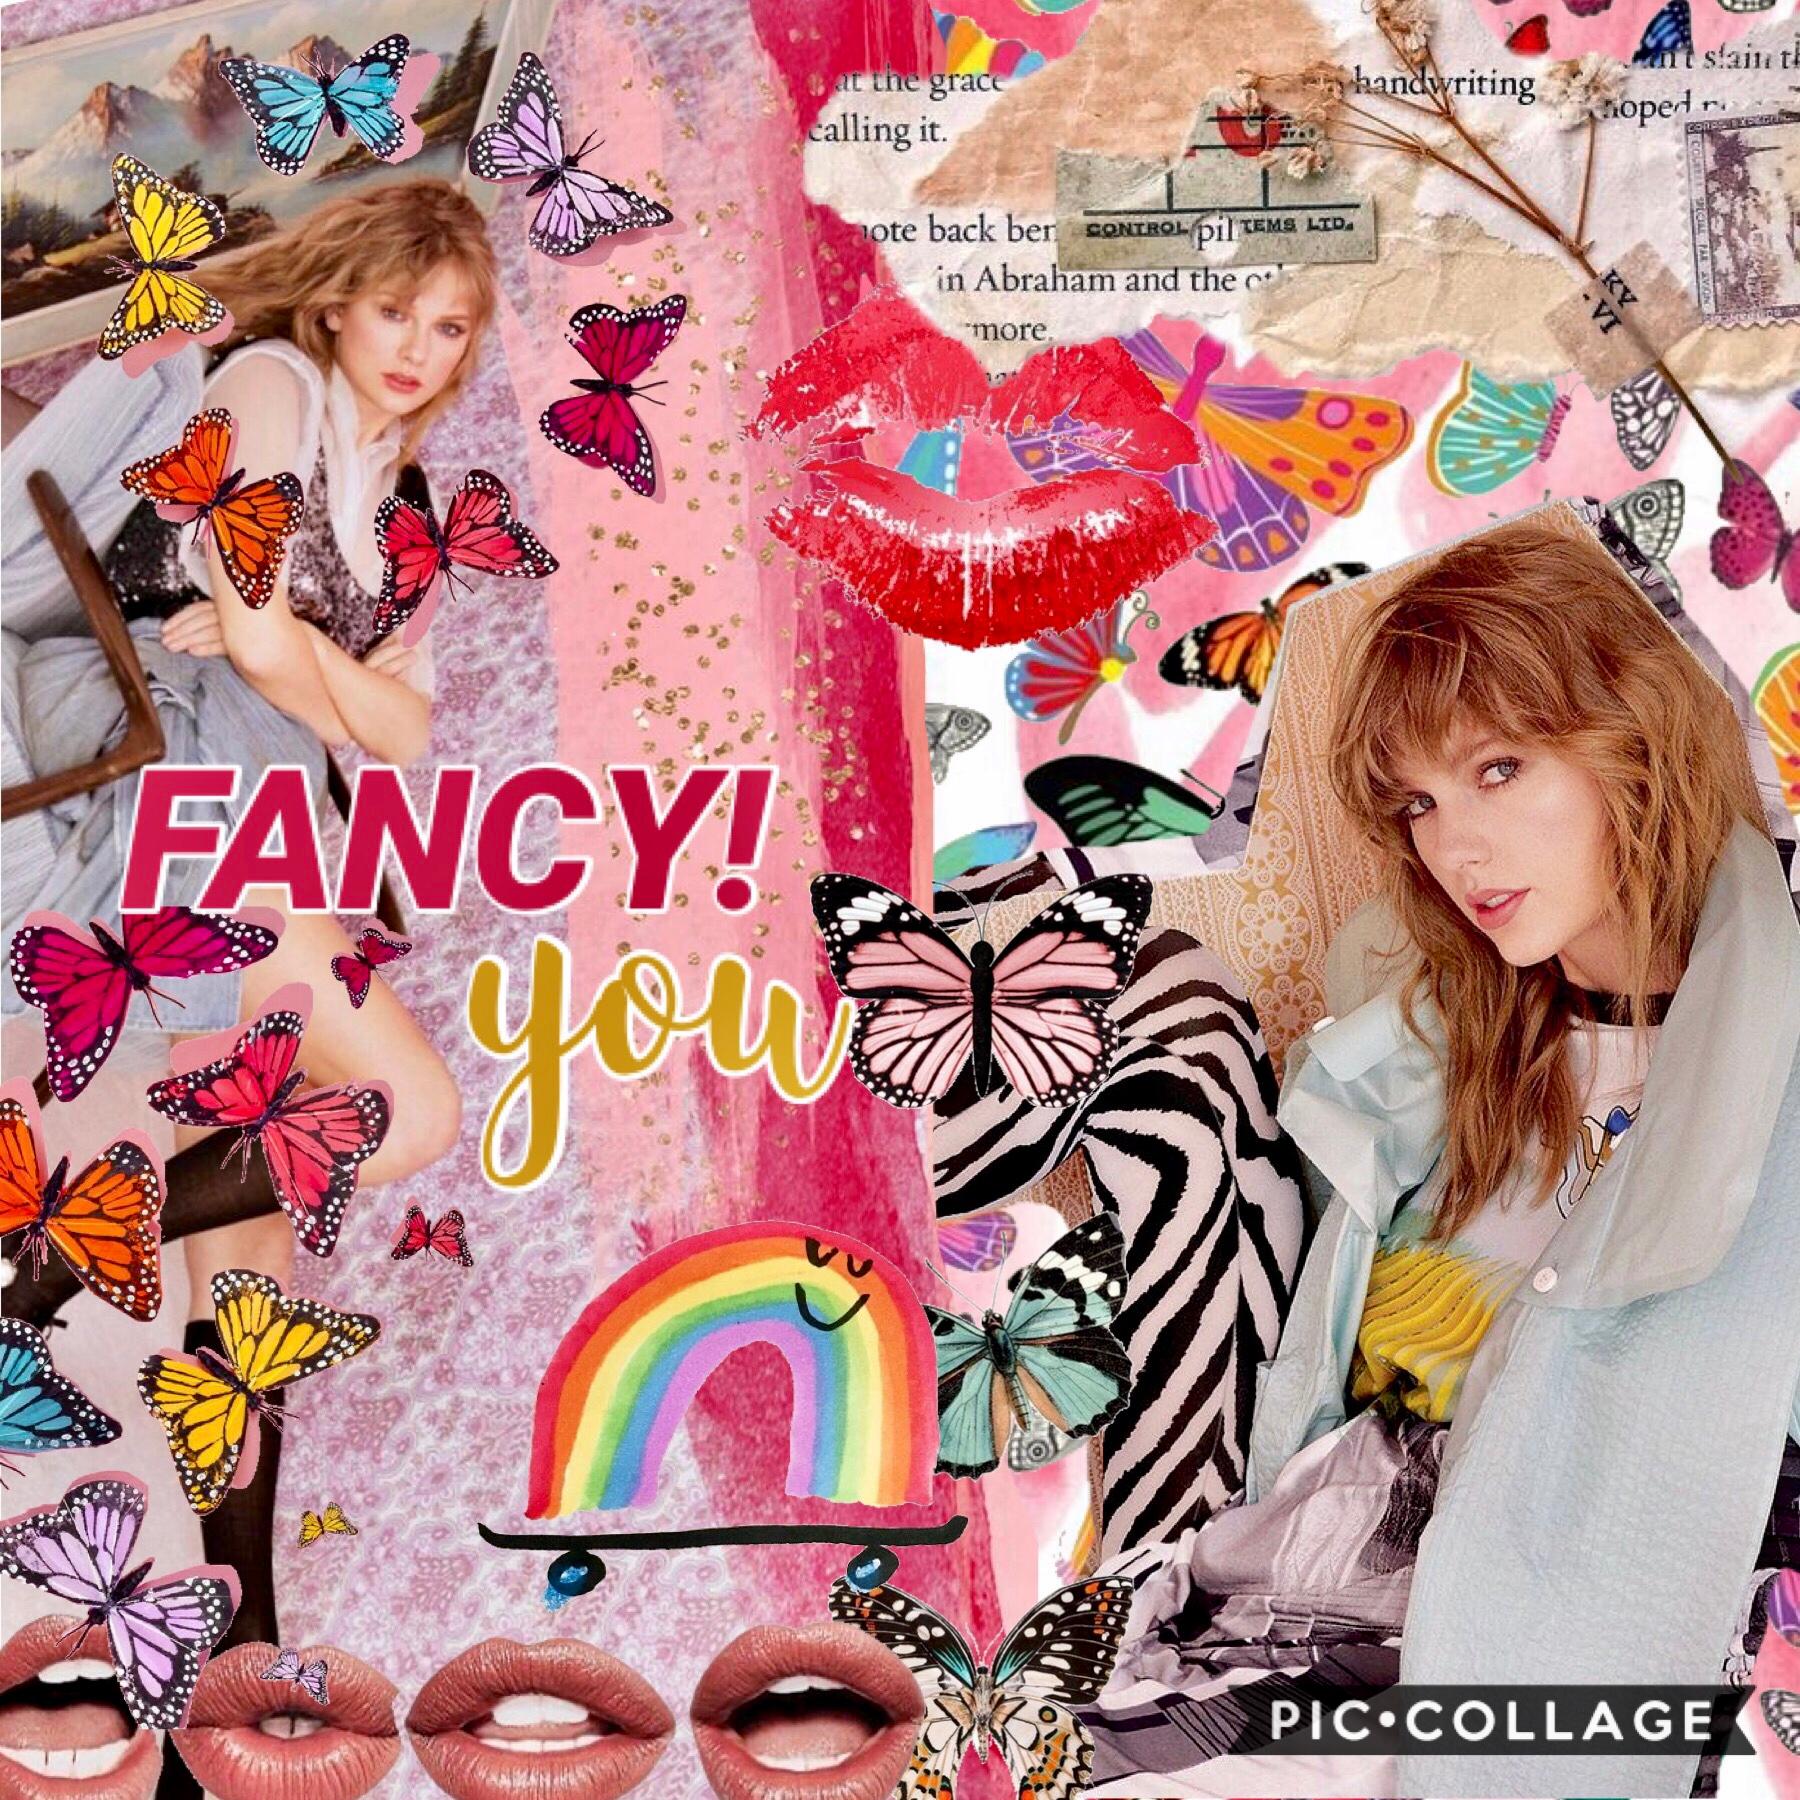 ✨ HI ✨
🌸🦋🐝🐳🍃🌺🌷🌱⭐️
AN ACTUAL COLLAGE WHO IS SHE ???
i have a caption but i’ll put it in the comments later when i have more time 
💞 lots of love 💞
song: fancy- TWICE